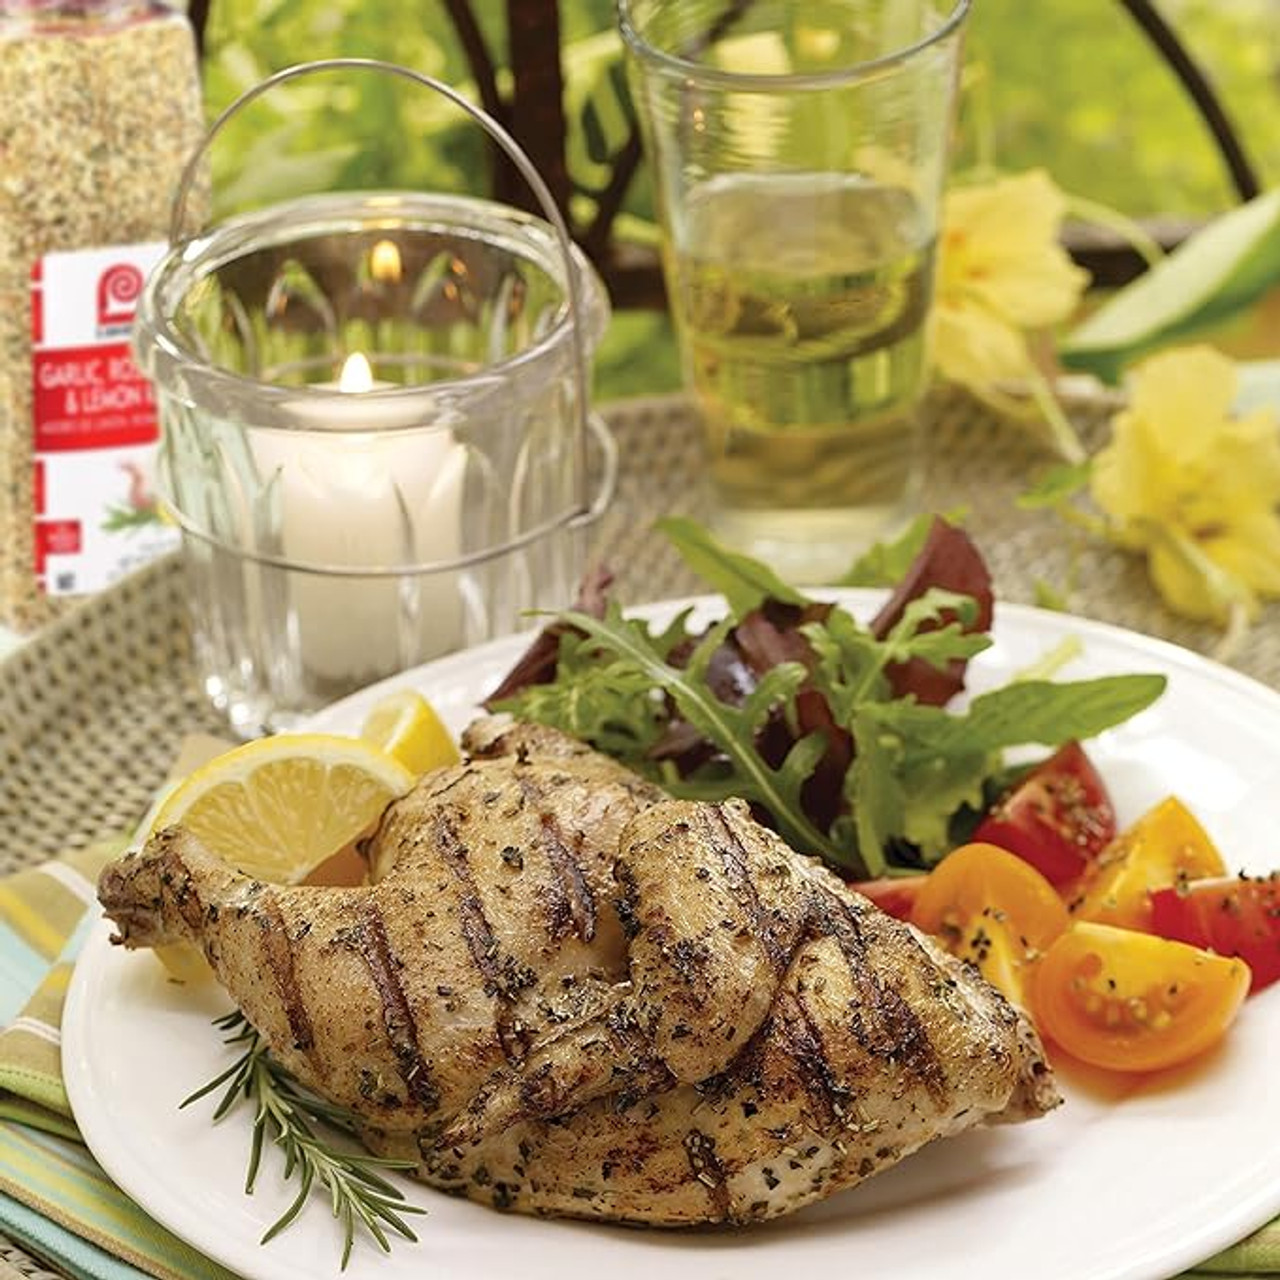 Lawry's Garlic, Rosemary, and Lemon Rub, 22 oz. - 6/Case Bold Flavor for Grilled - Chicken Pieces